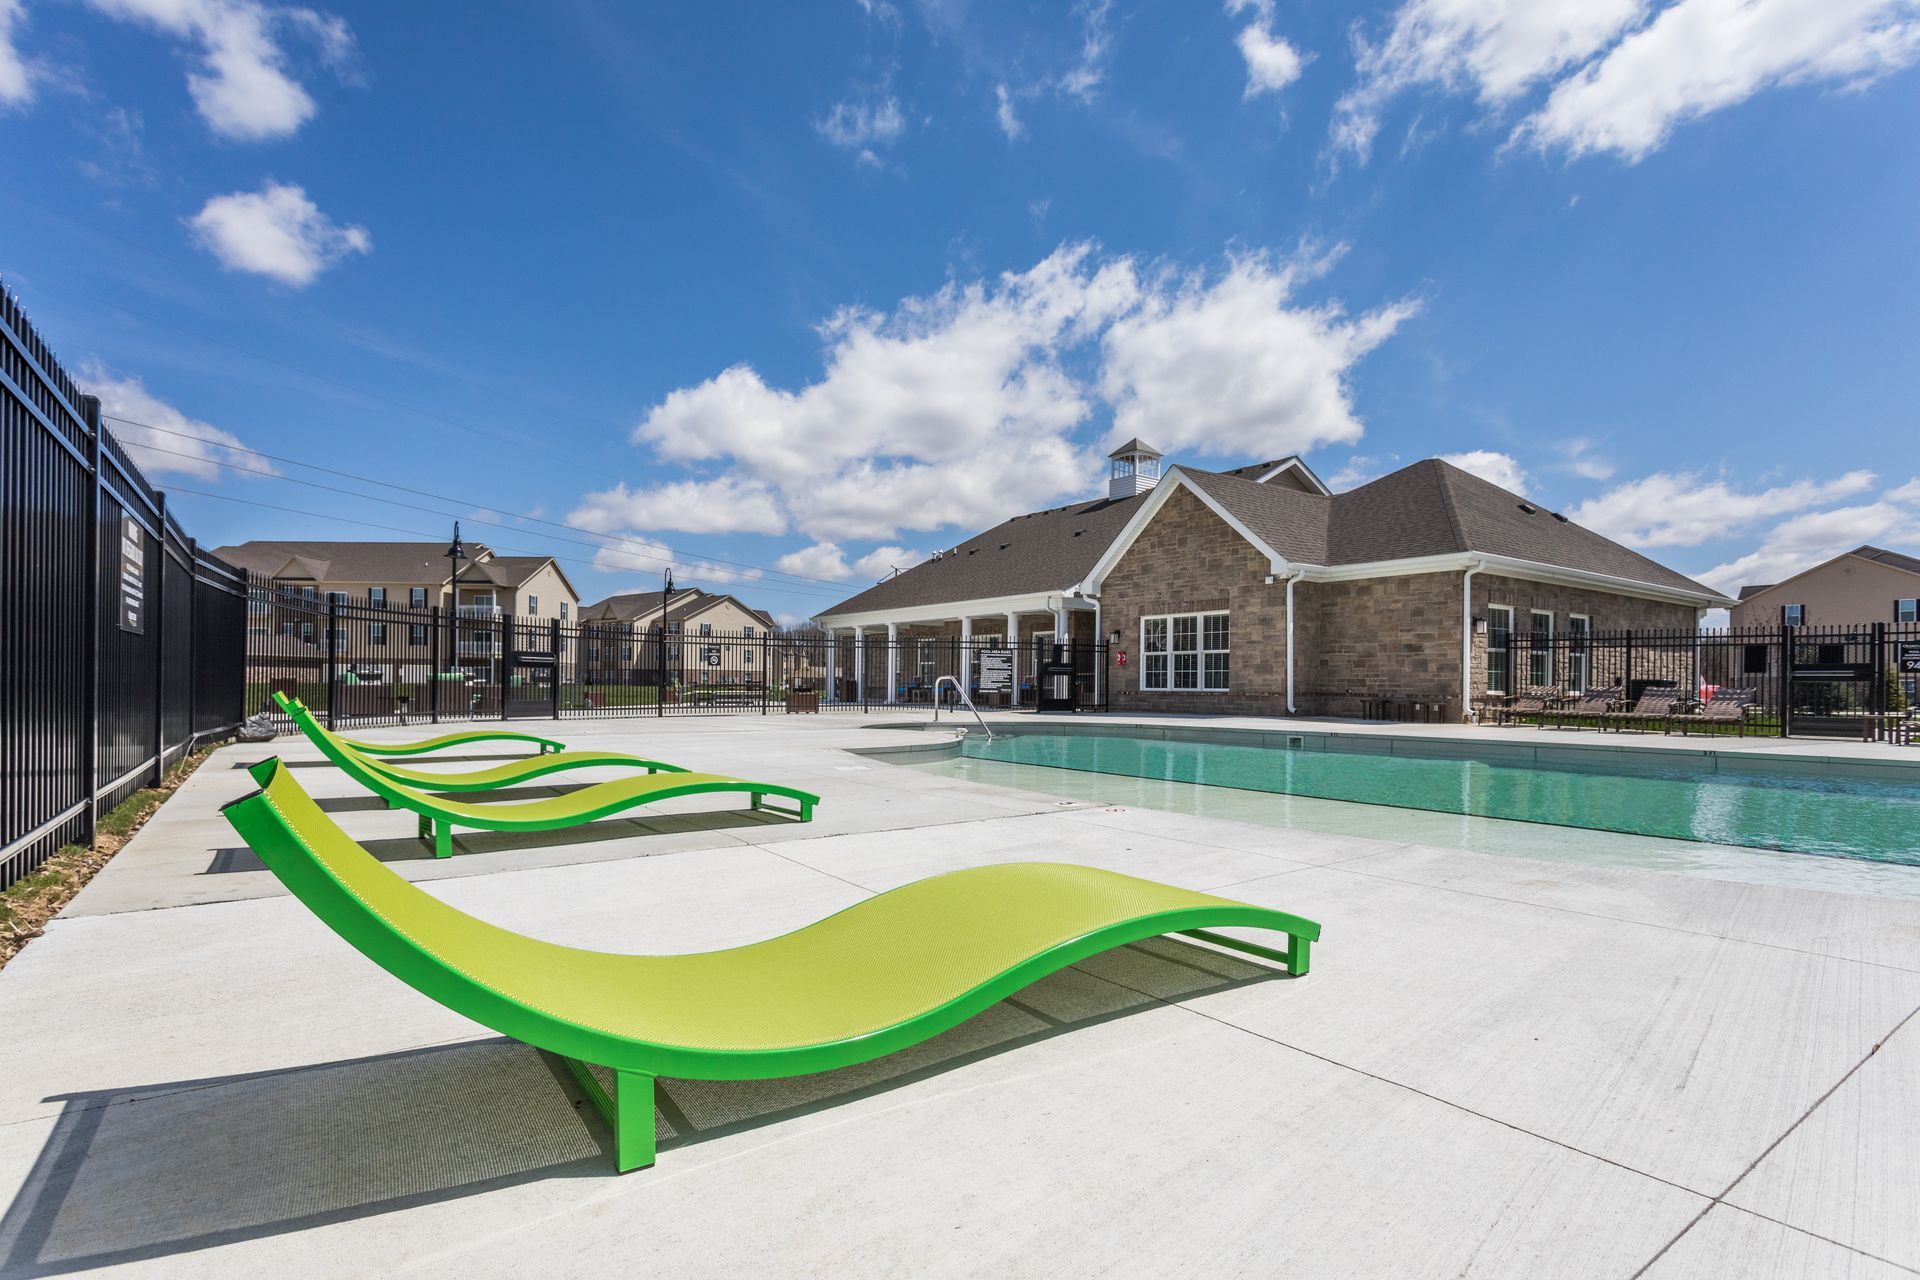 Exterior photo of pool area with seating